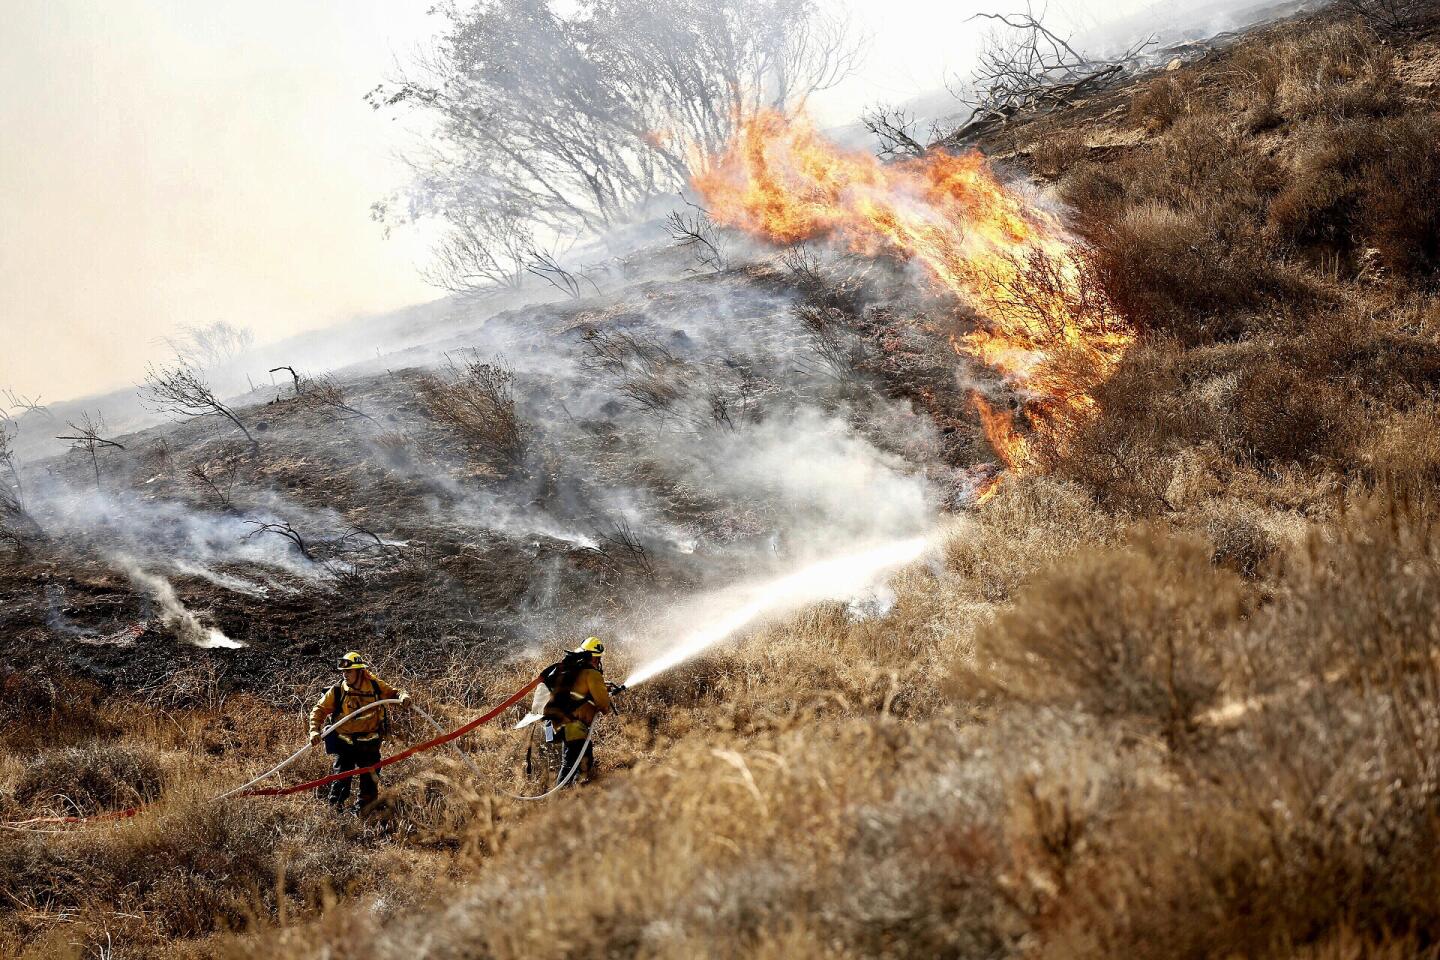 Nearly 100 Los Angeles firefighters were able to contain a five-acre brush fire in the 17000 block of Sesnon Boulevard in Granada Hills near O'Melveny Park.